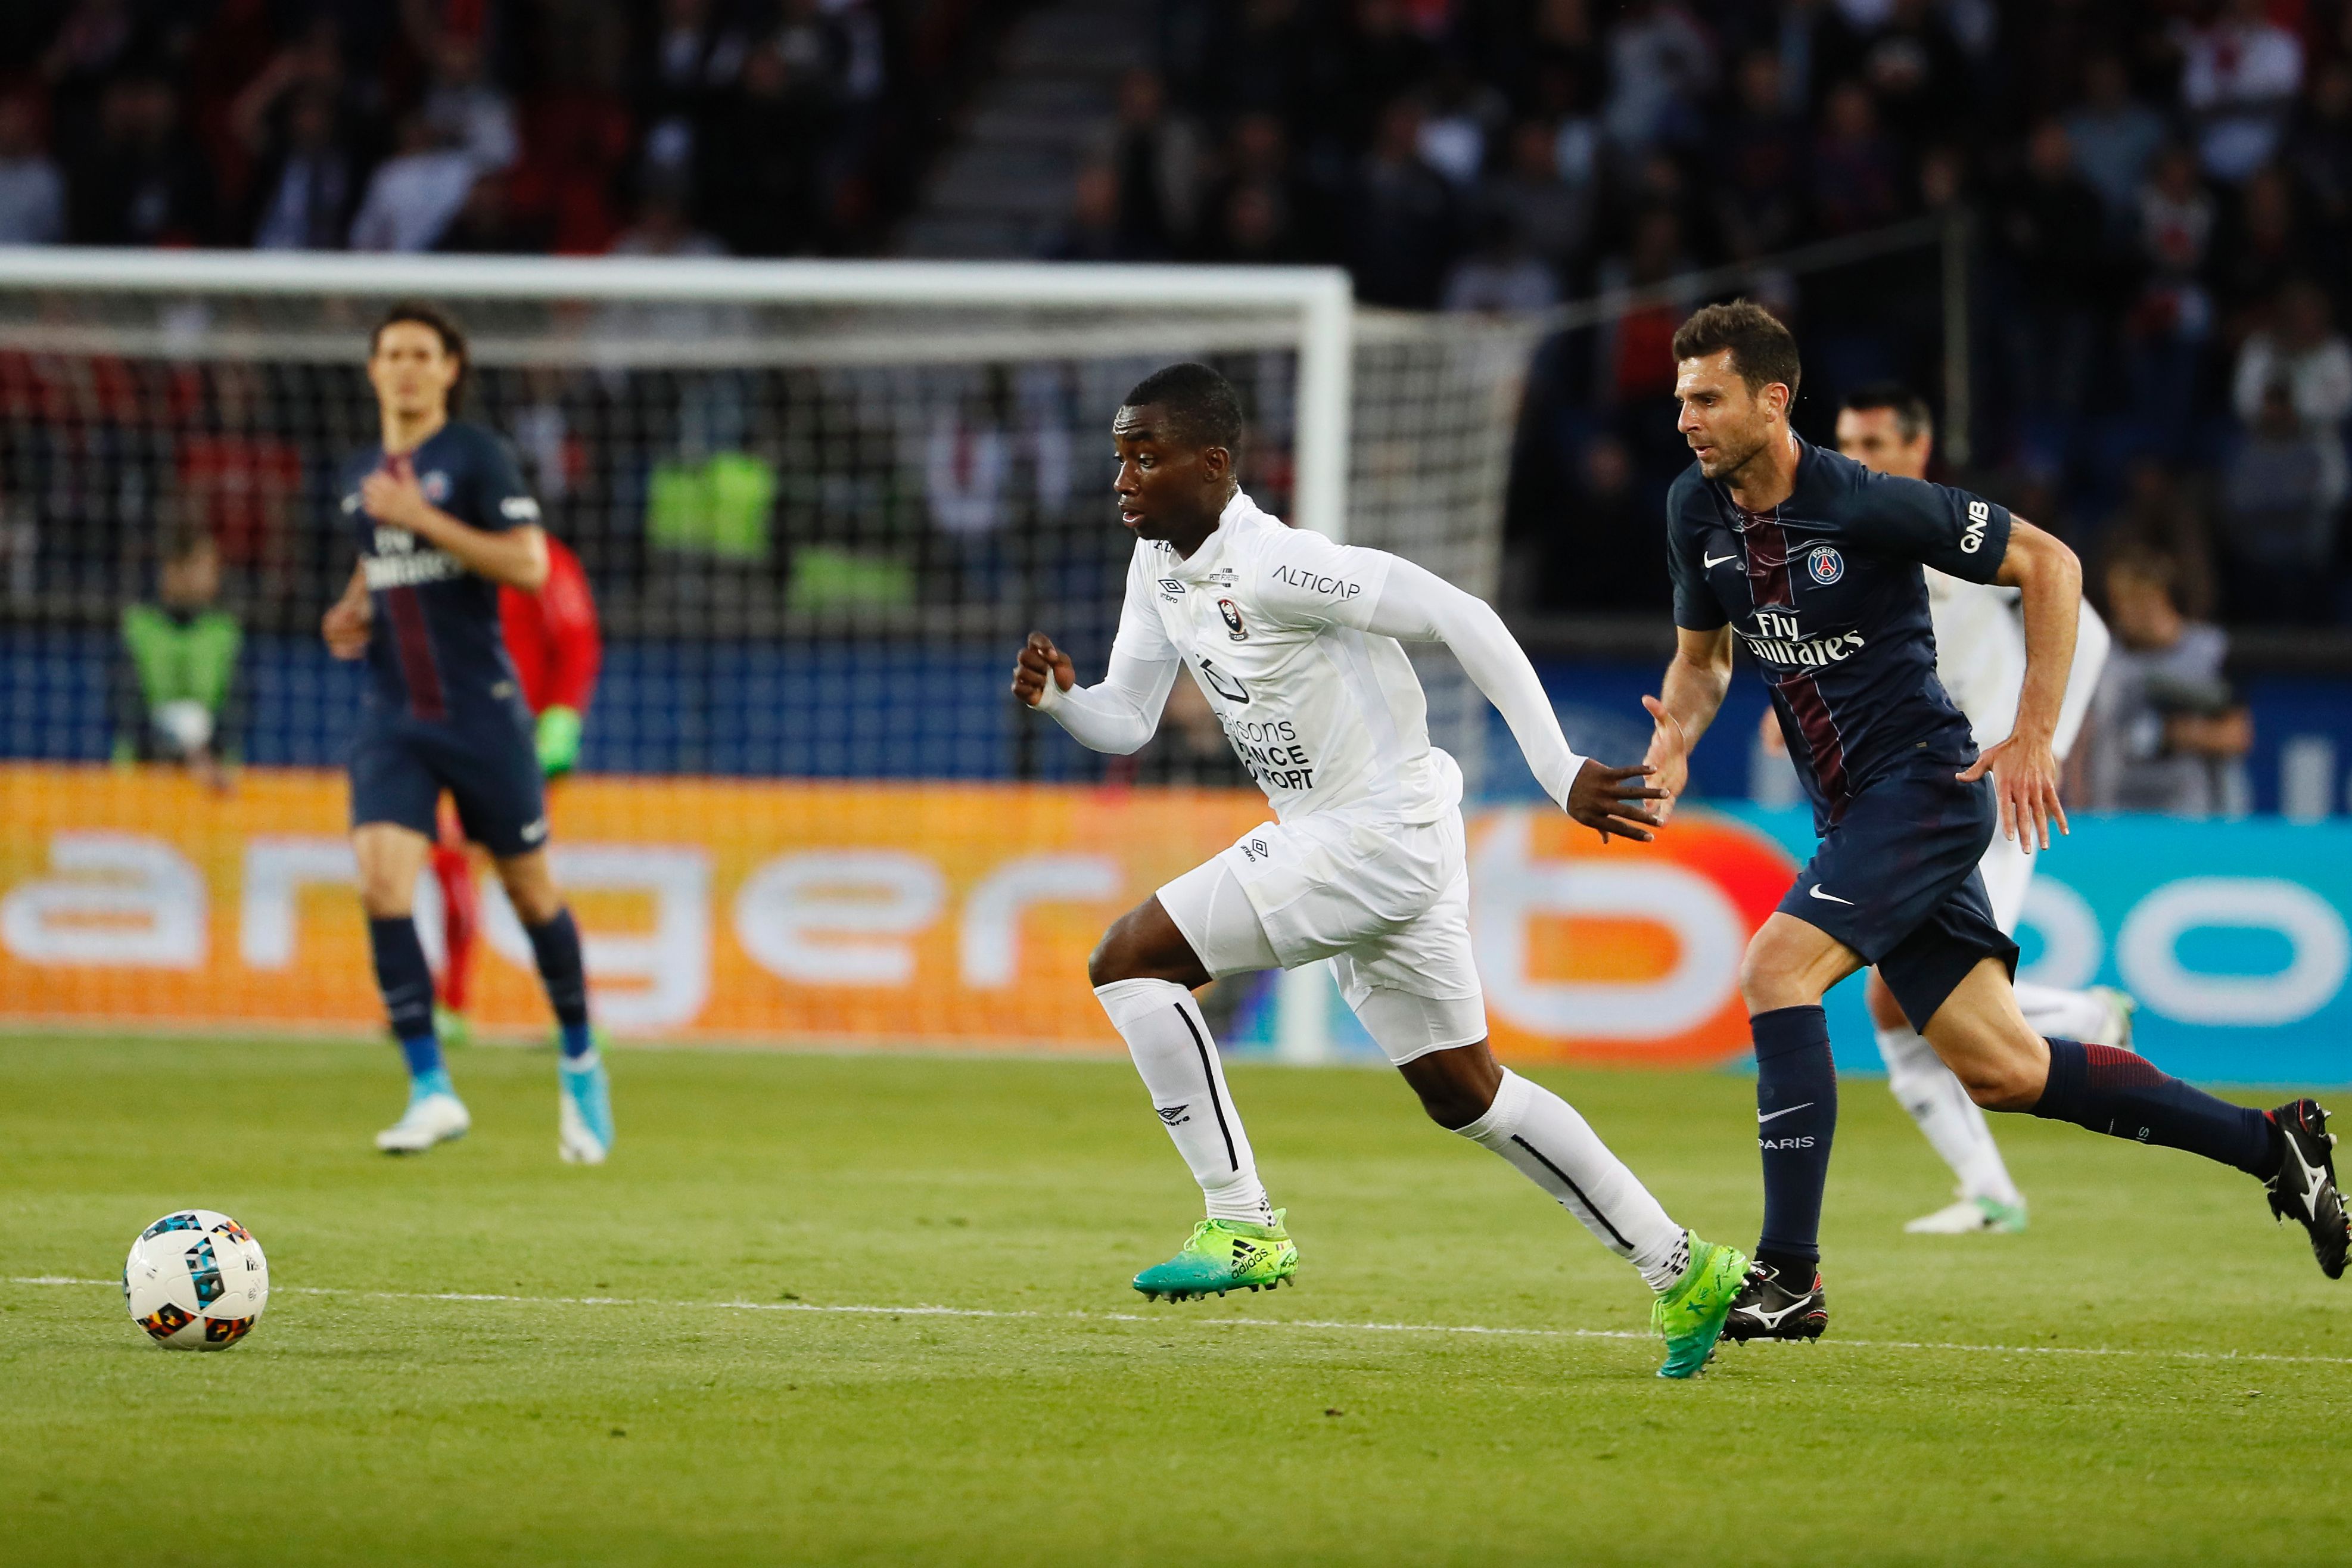 Caen's French forward Yann Karamoh (L) controls the ball during the French L1 football match between Paris Saint-Germain (PSG) and SM Caen on May 20, 2017 at the Parc des Princes stadium, in Paris. / AFP PHOTO / THOMAS SAMSON        (Photo credit should read THOMAS SAMSON/AFP/Getty Images)